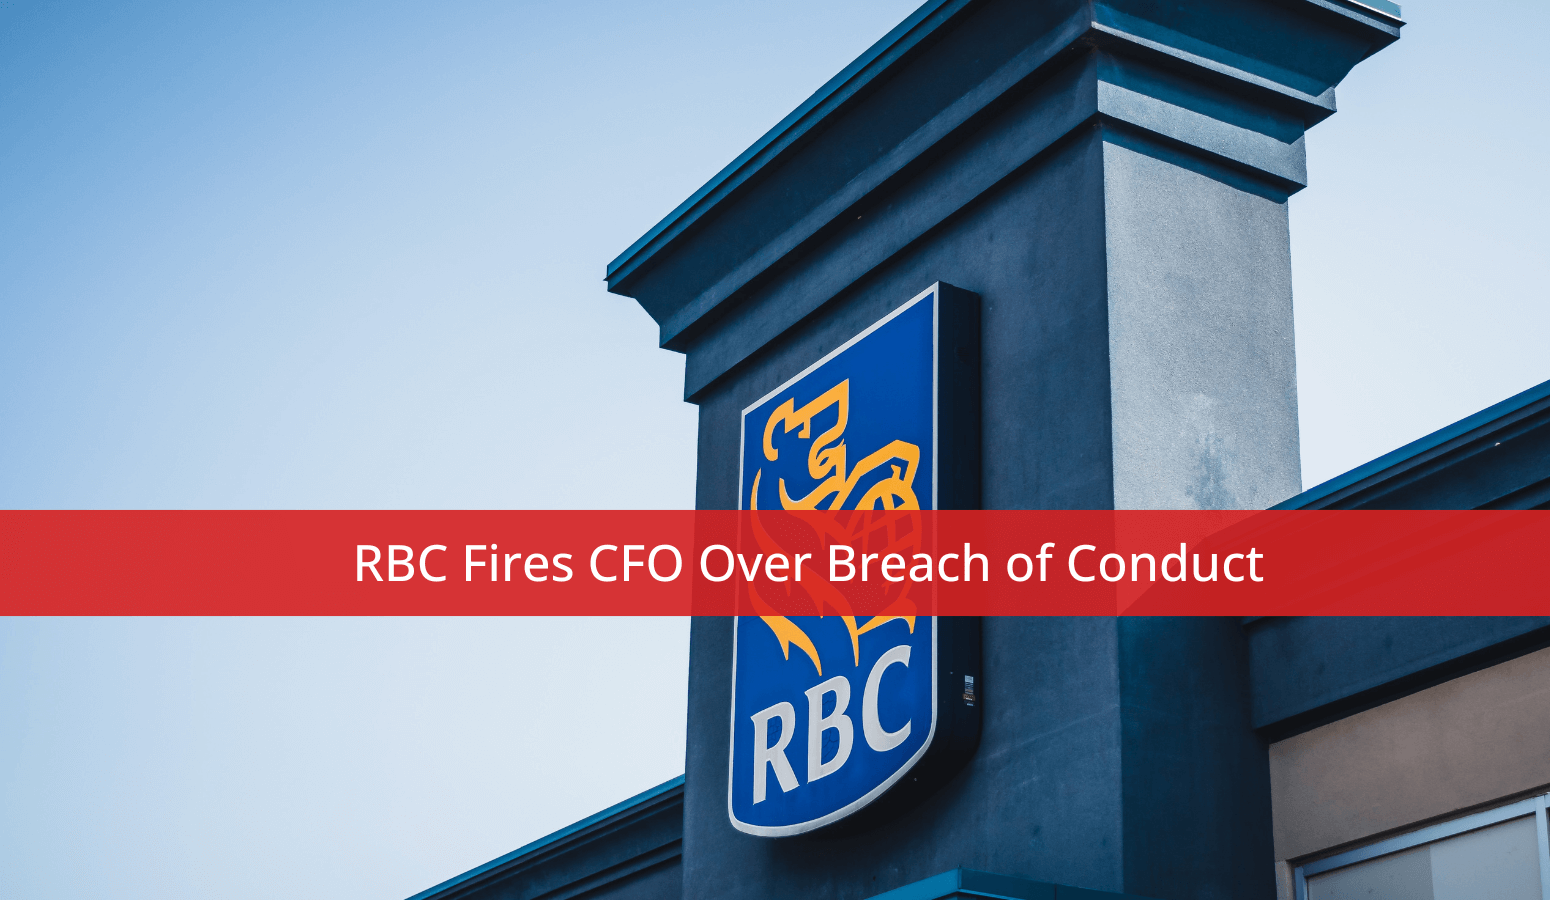 Featured image for “RBC Fires CFO Over Breach of Conduct”